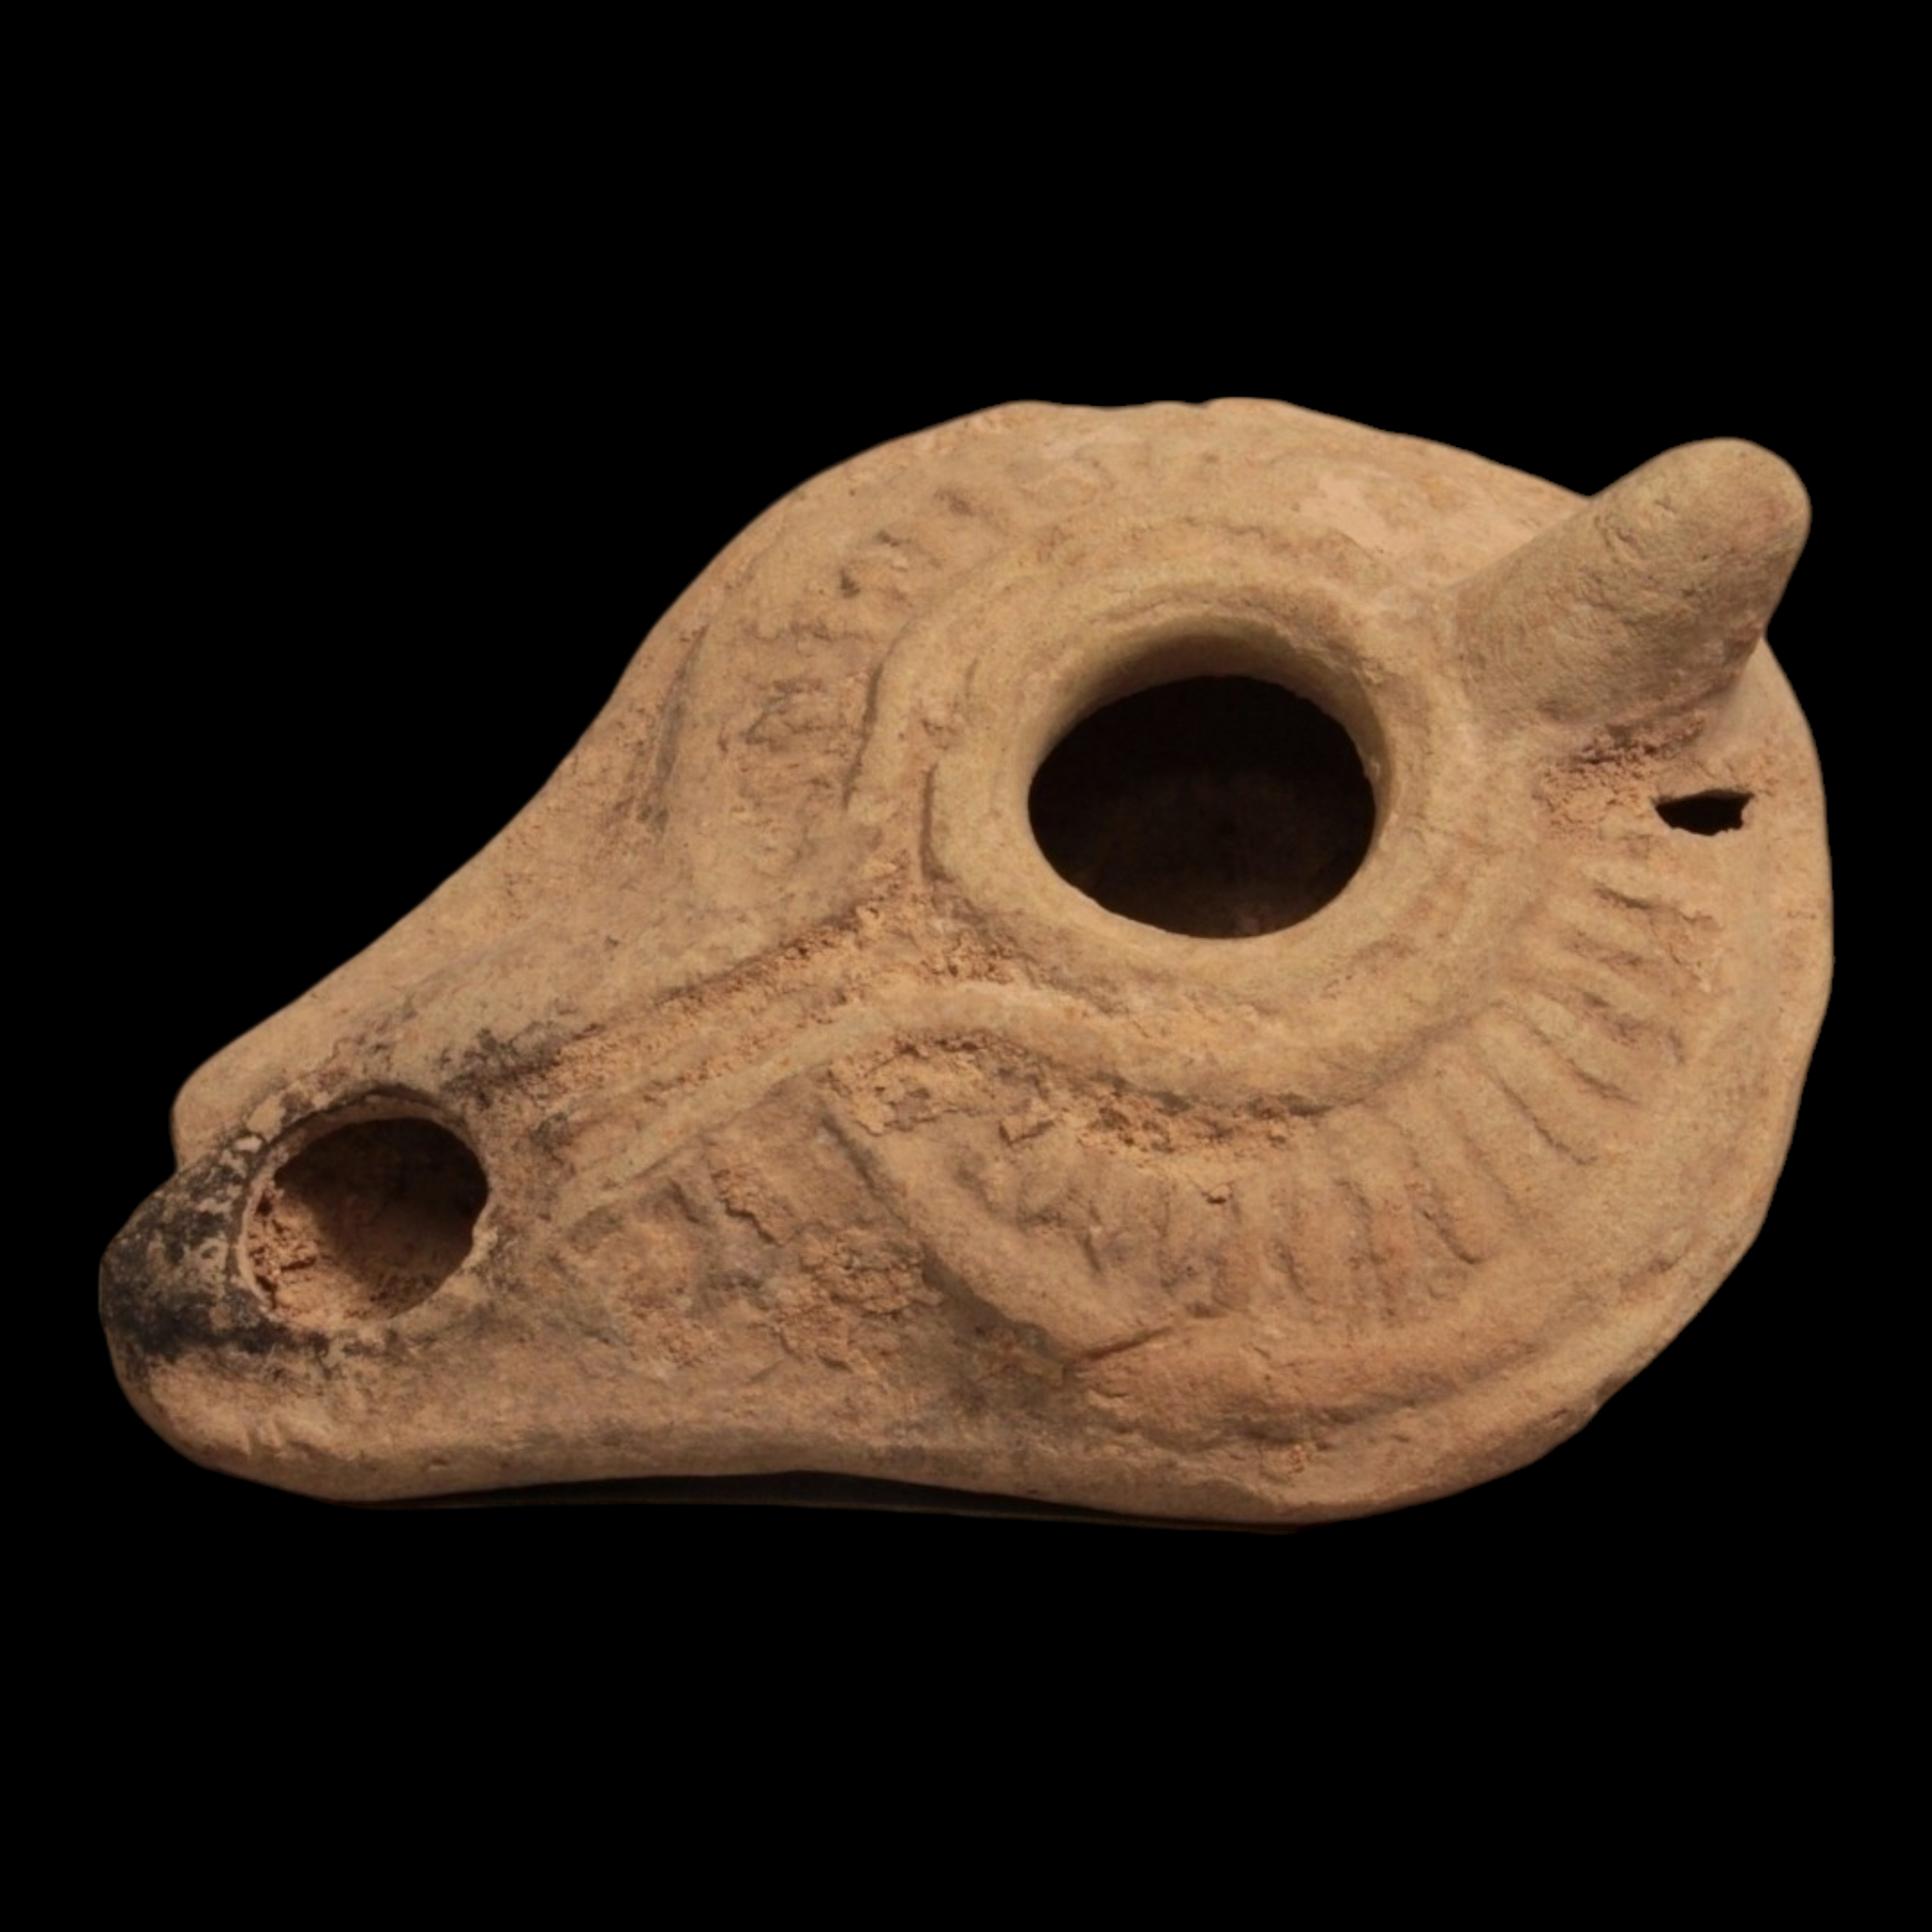 Late Roman Oil Lamp, 3.2 inch - c. 100 to 476 CE - Middle East